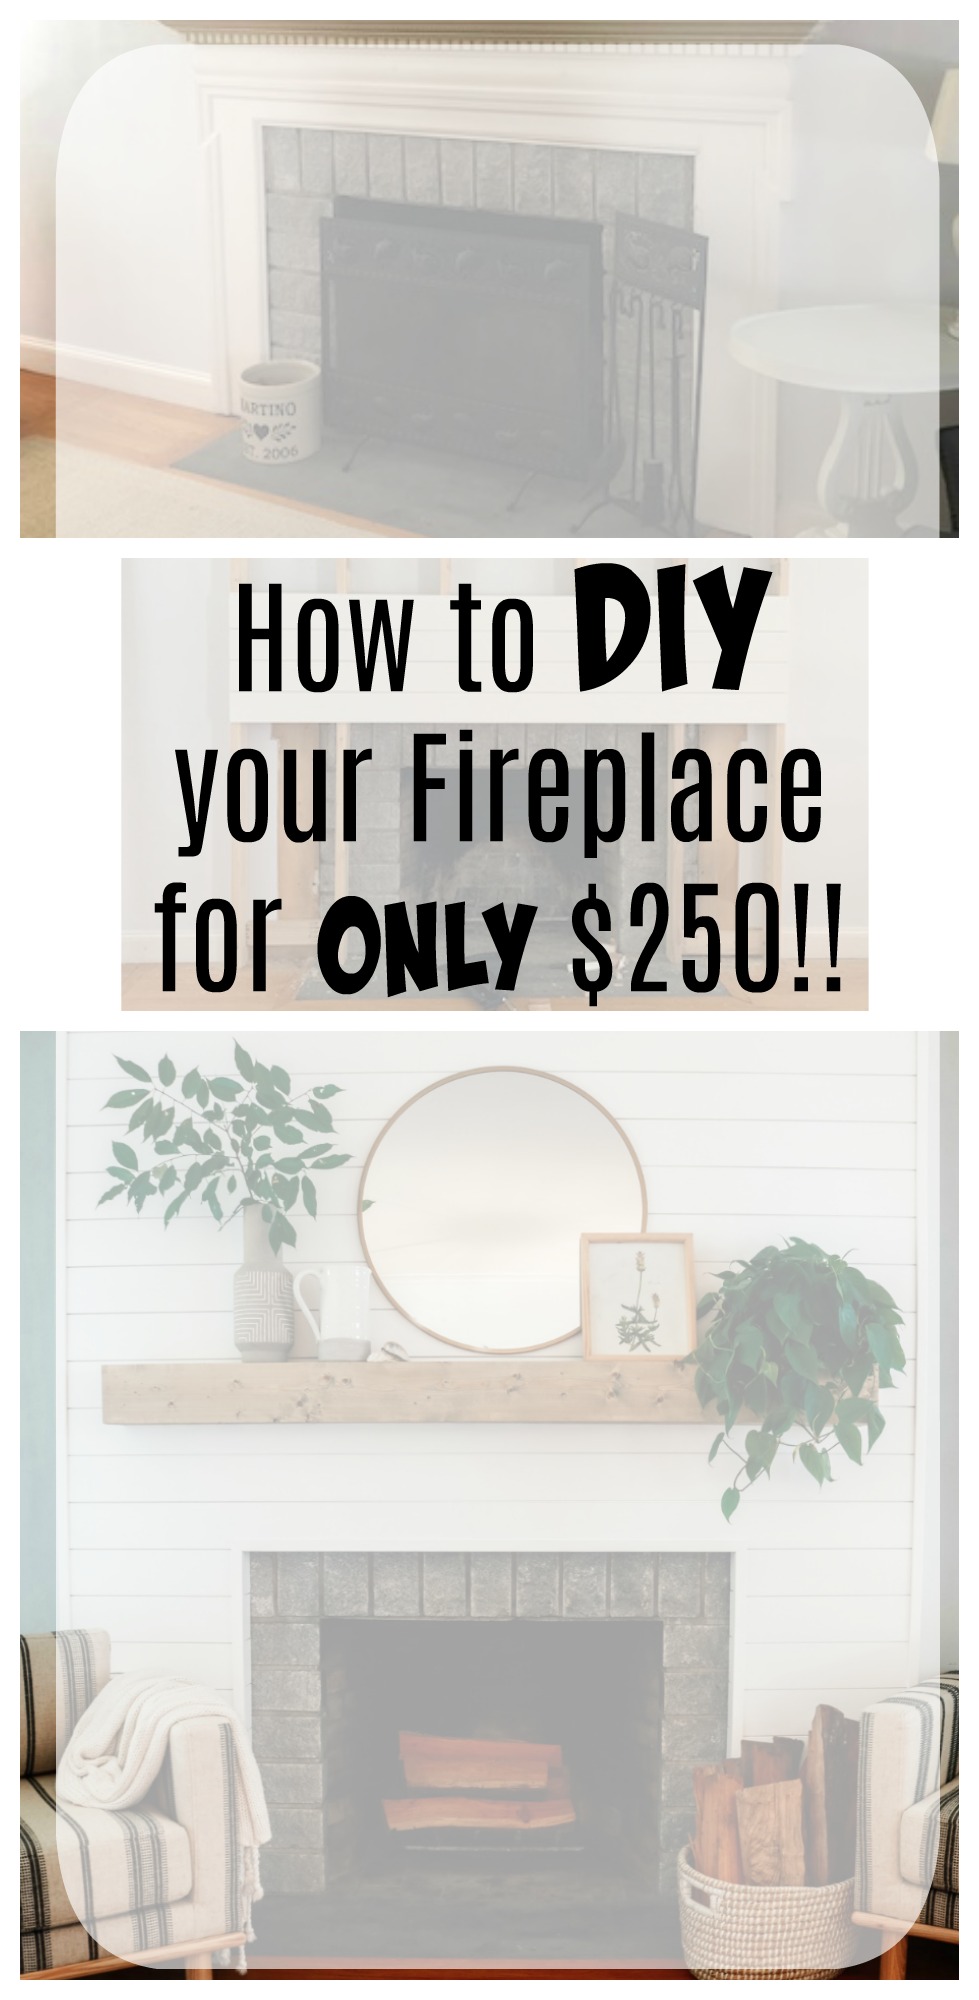 Electric Fireplace with Wood Mantel New Shiplap Fireplace and Diy Mantle Ditched the Old